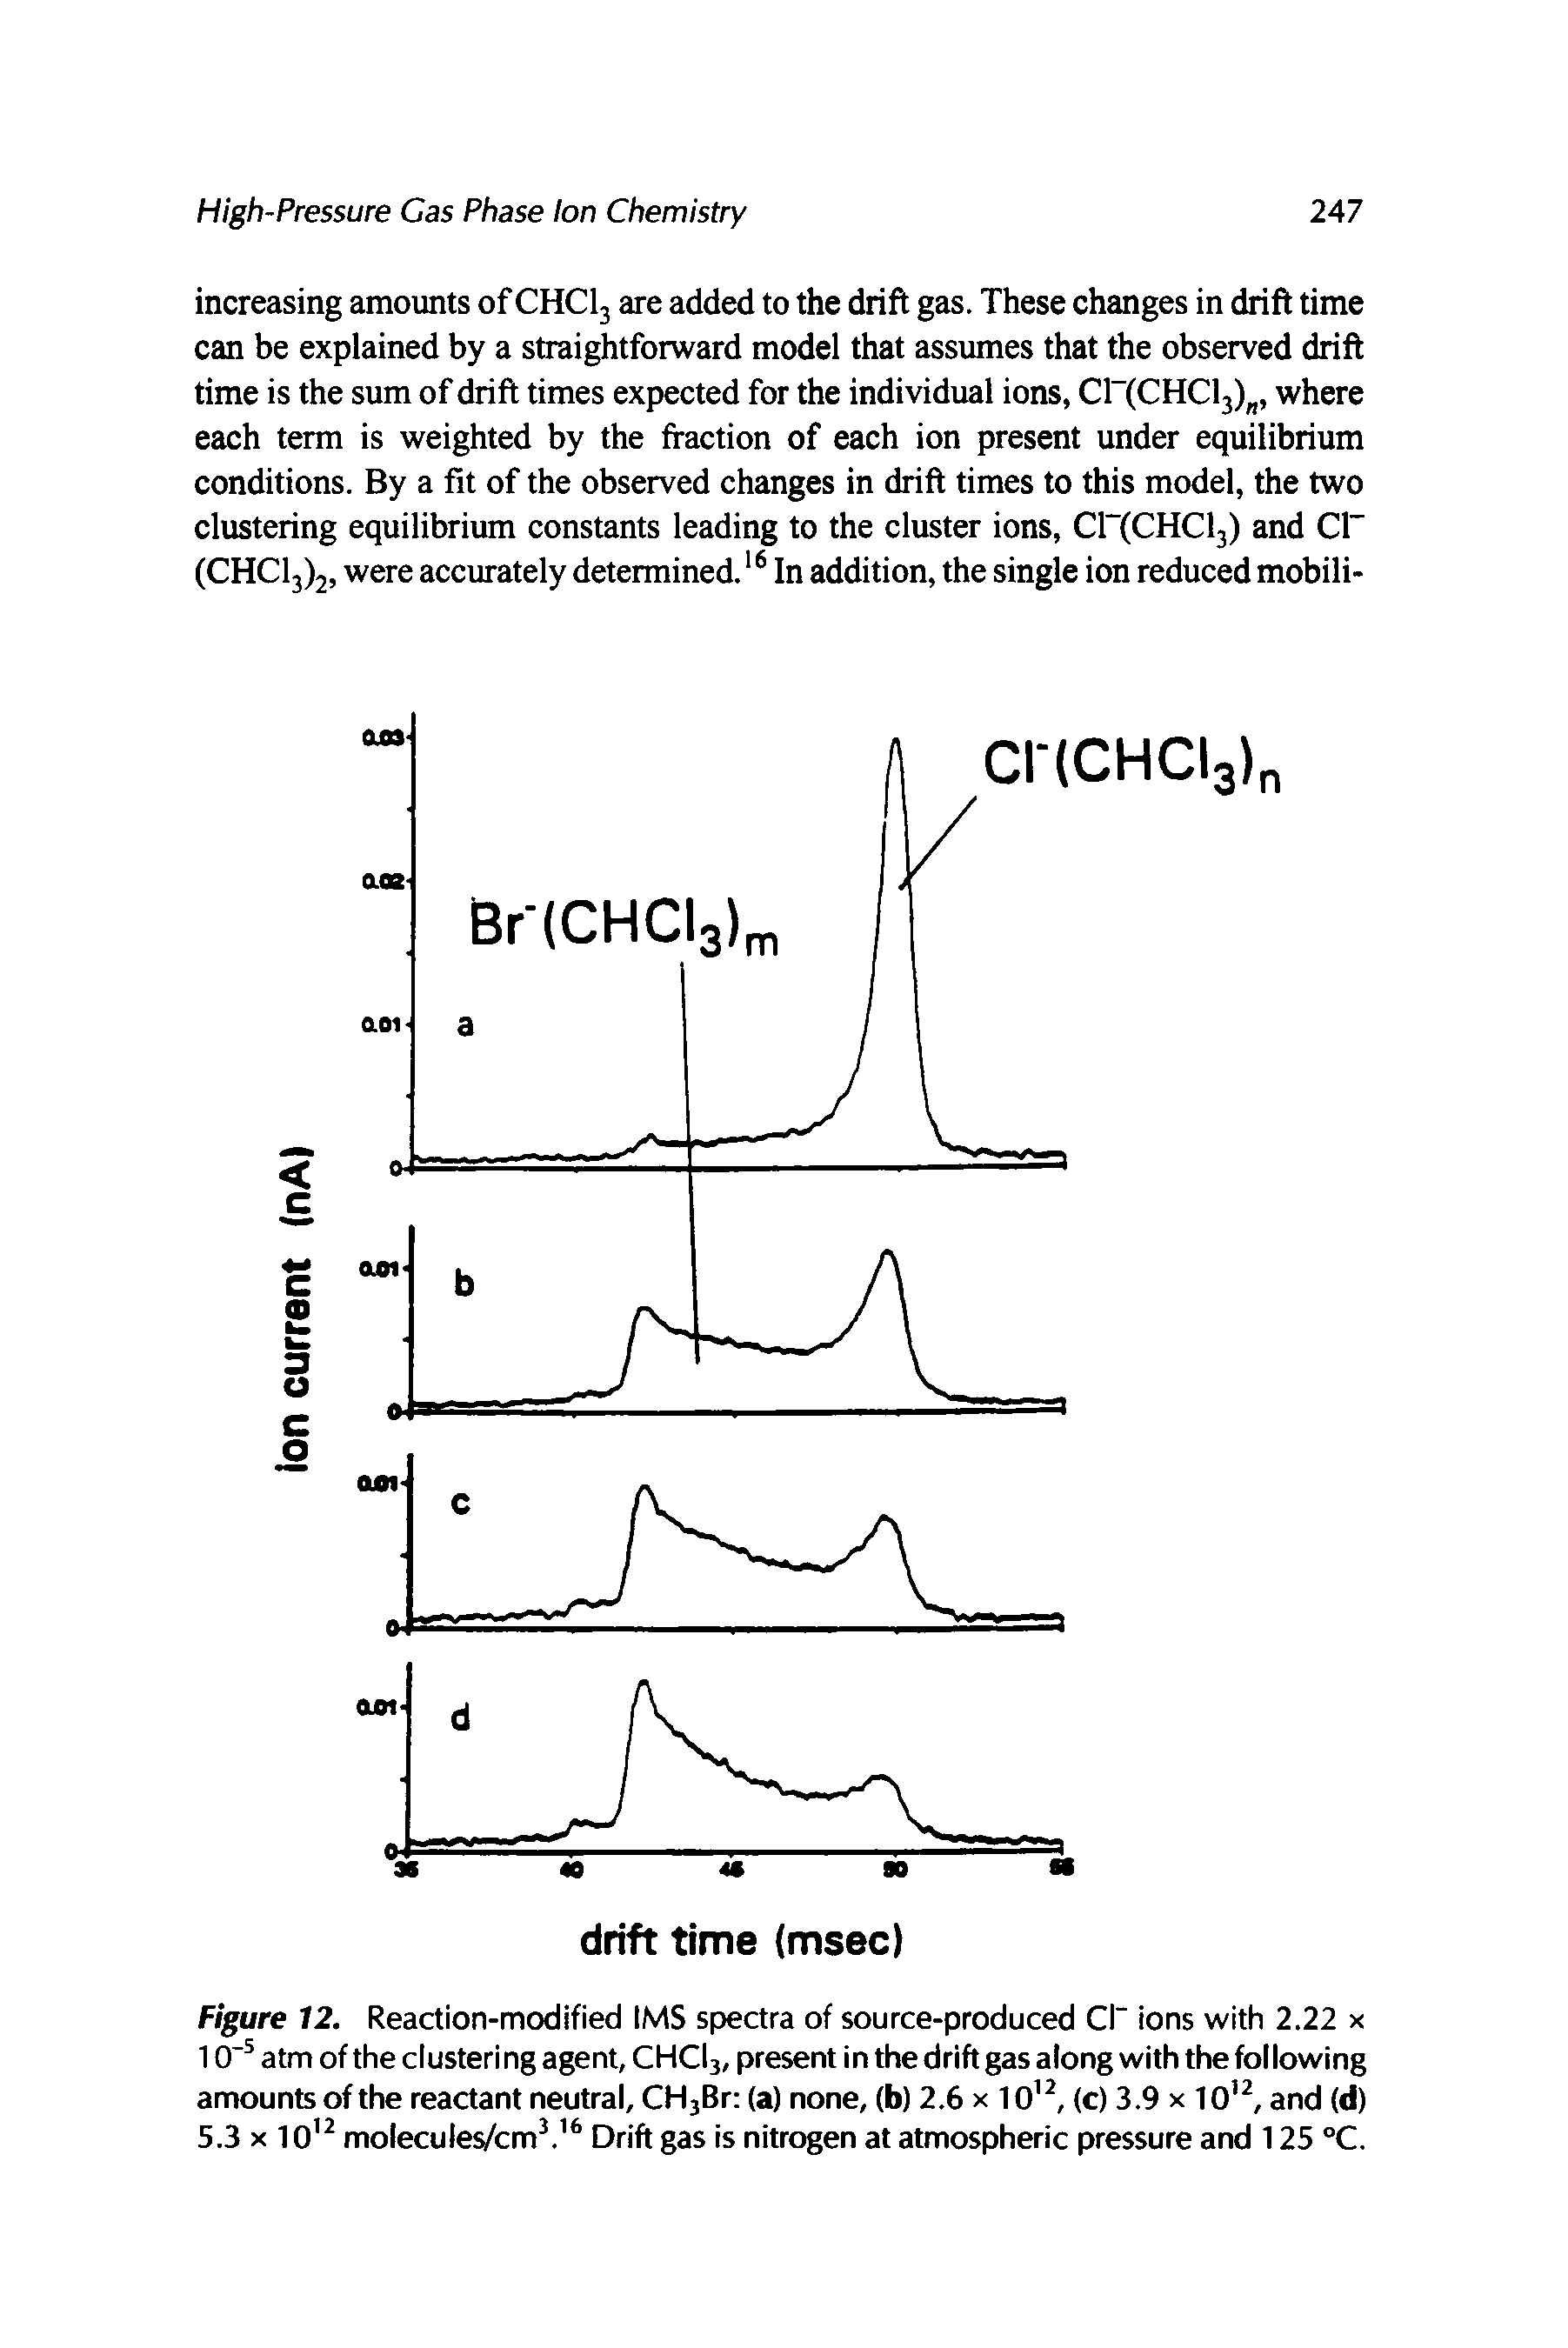 Figure 12. Reaction-modified IMS spectra of source-produced Cl ions with 2.22 x 10 atm of the clustering agent, CHCI3, present in the drift gas along with the following amounts of the reactant neutral, CH3Br (a) none, (b) 2.6 x lo, (c) 3.9 x 1 o, and (d) 5.3 X 10 molecules/cm . Drift gas is nitrogen at atmospheric pressure and 125 °C.